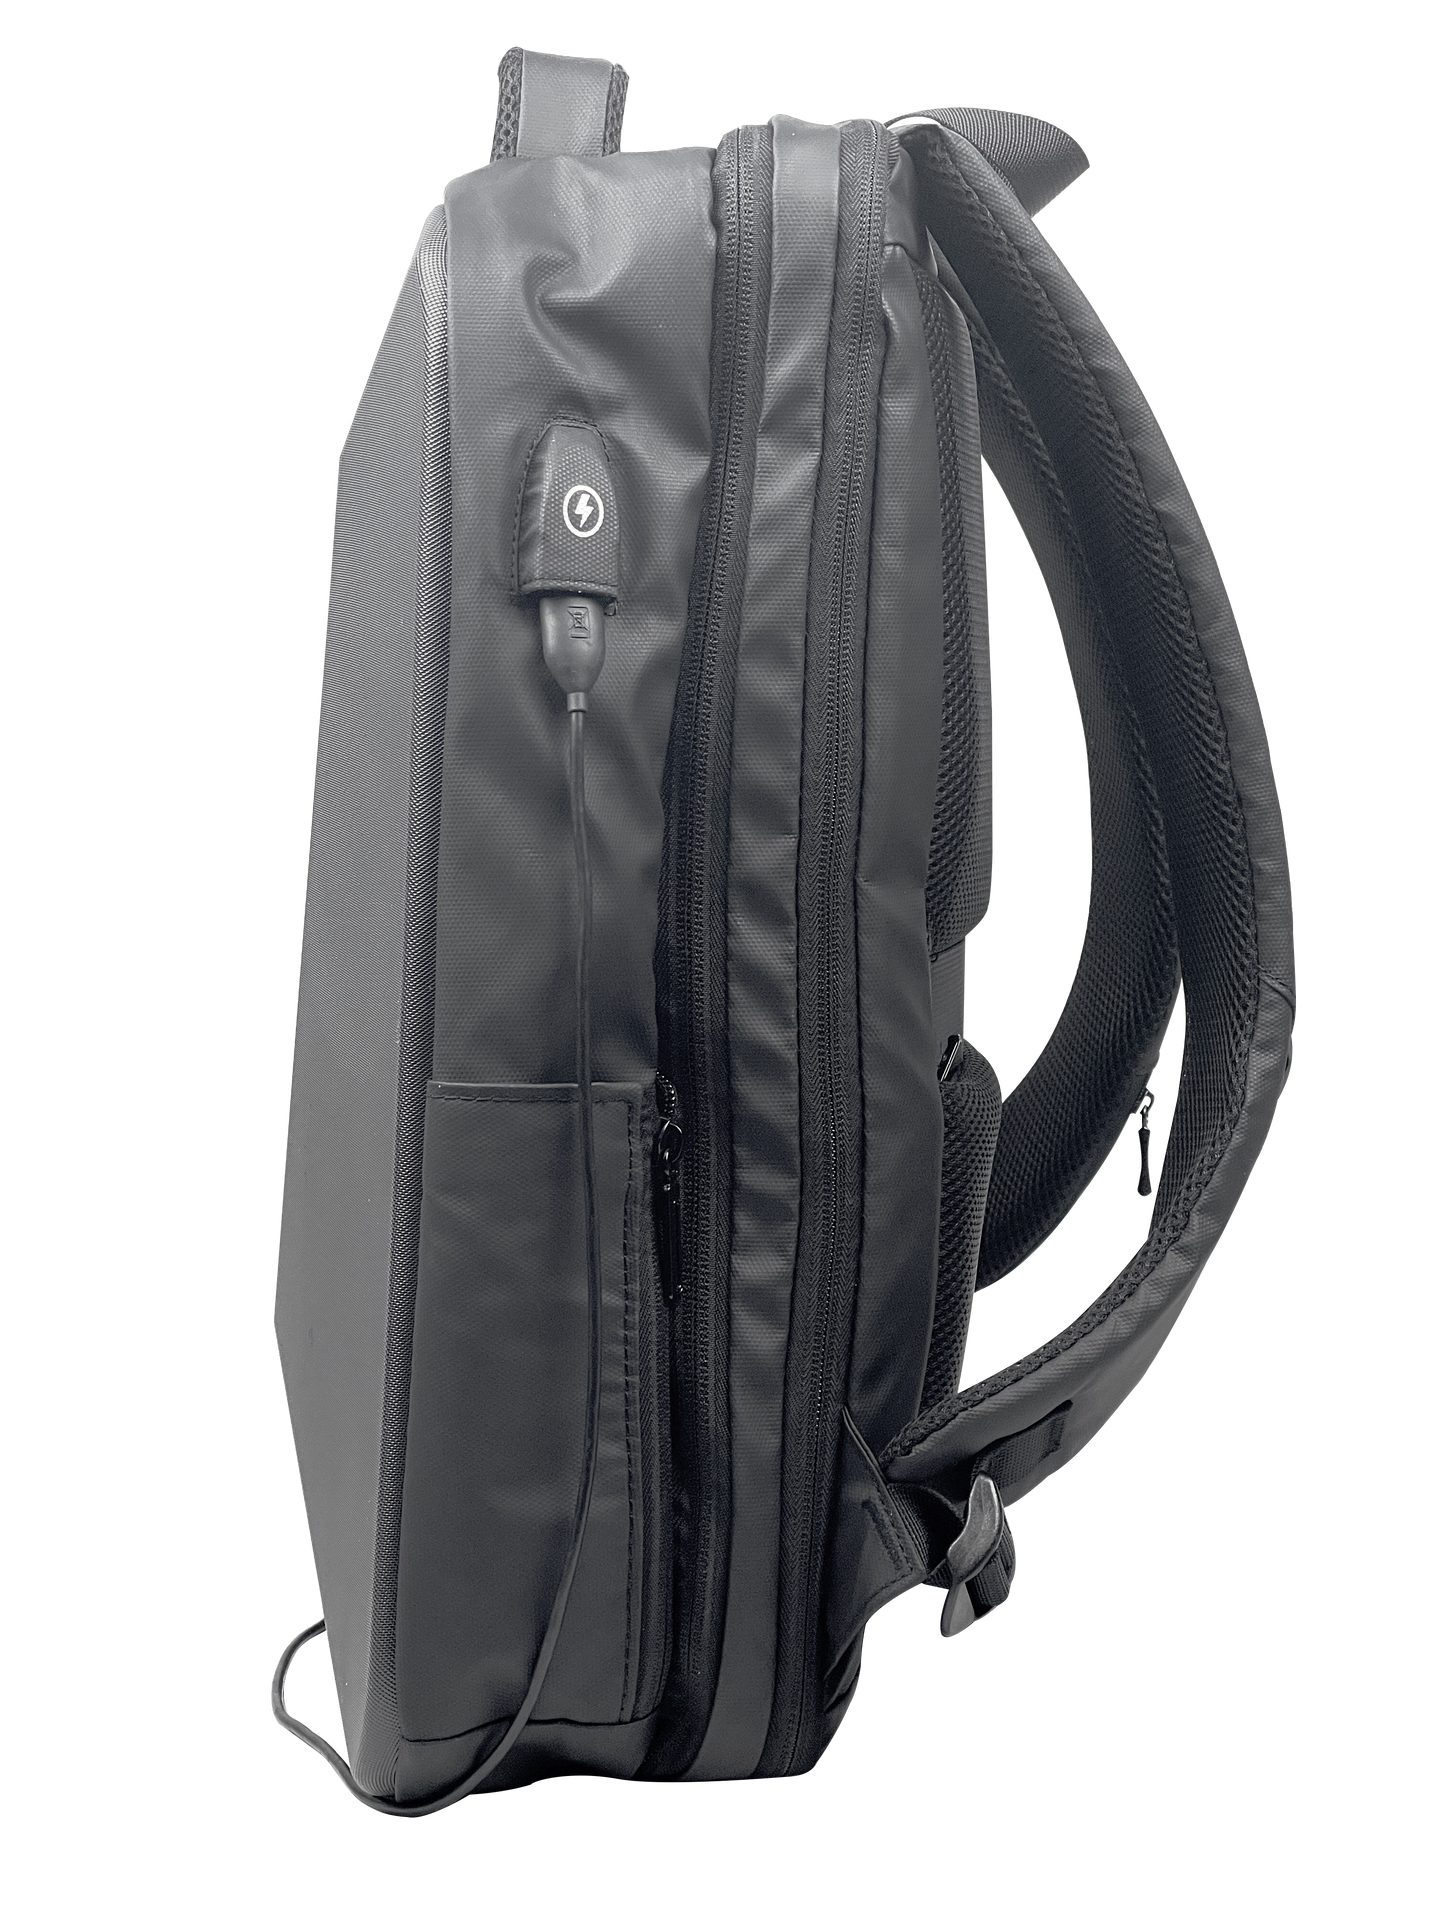 XOTIC PC Black Hardshell Anti Theft Waterproof Backpack - Labor Day Special